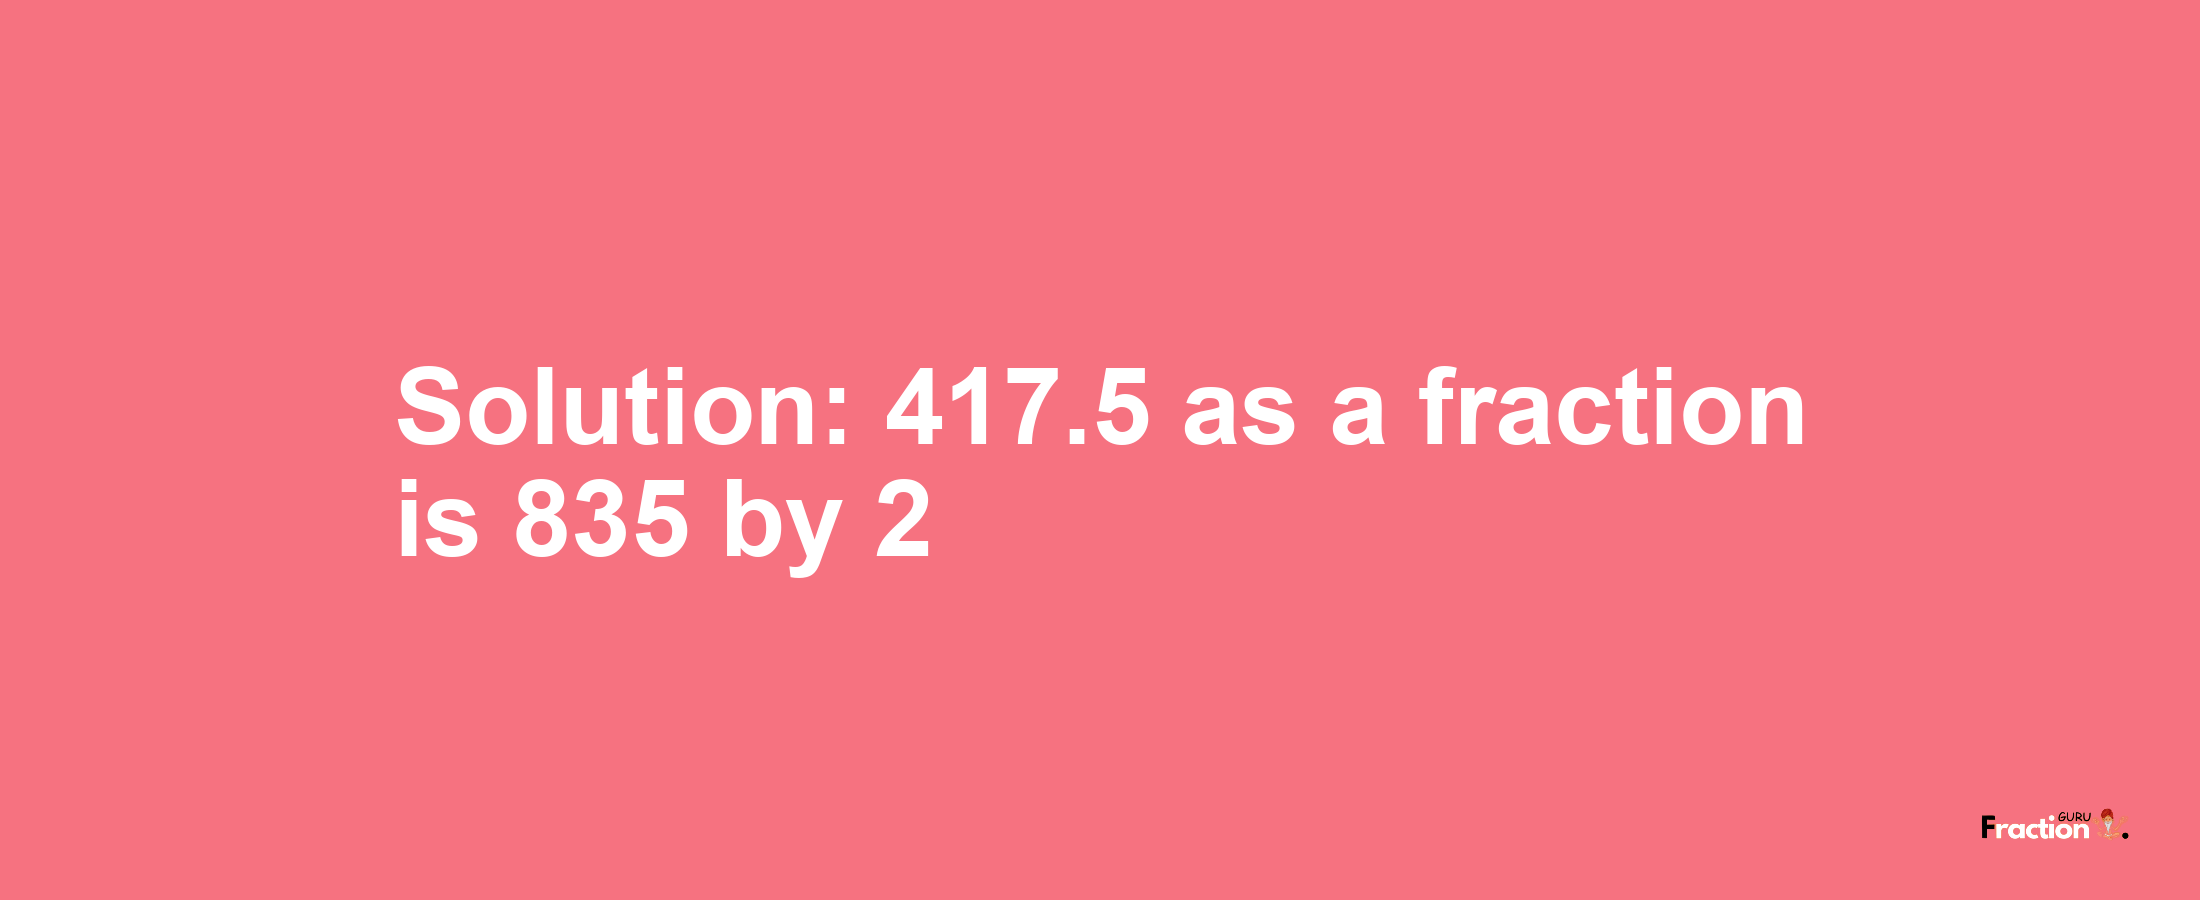 Solution:417.5 as a fraction is 835/2